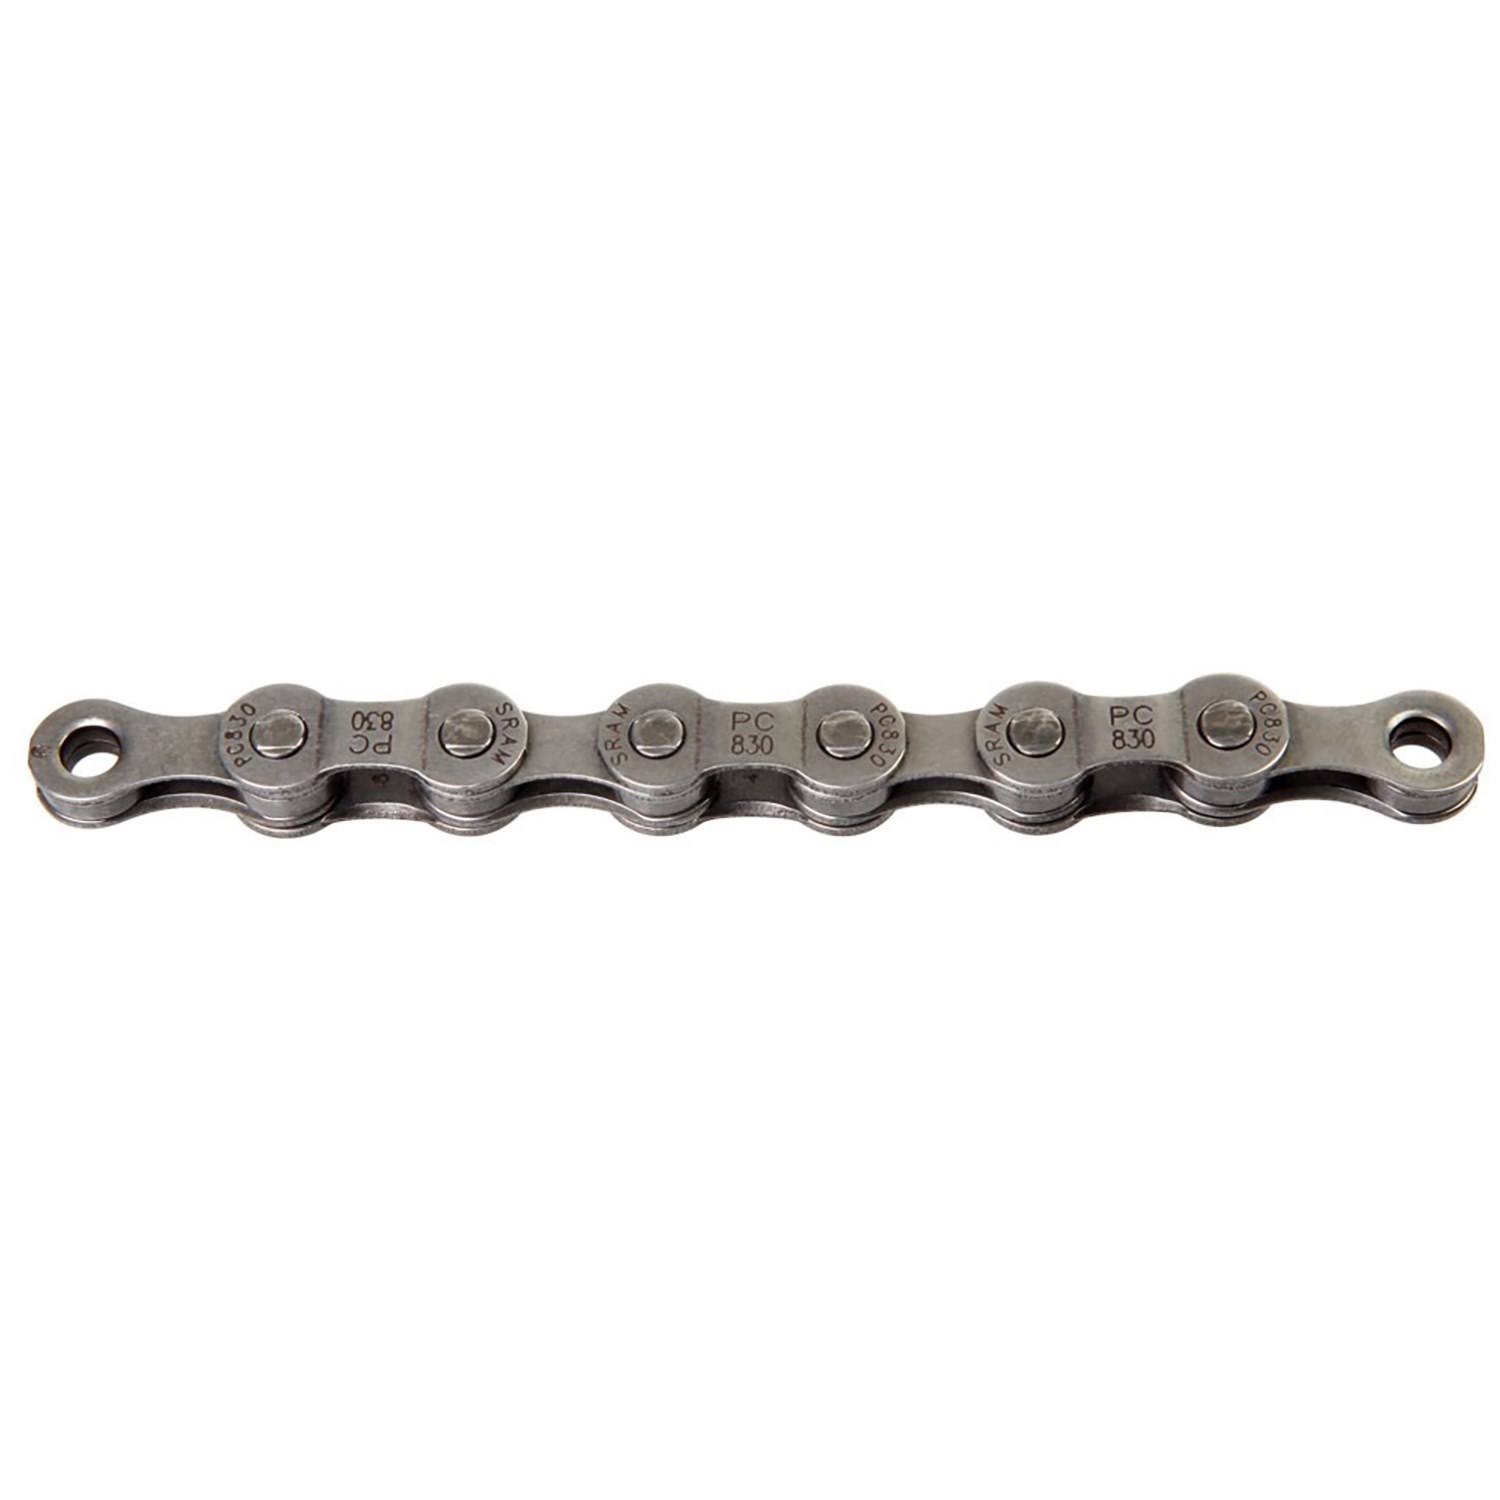 SRAM PC 830 P-Link Bicycle Chain - 8-Speed, Grey